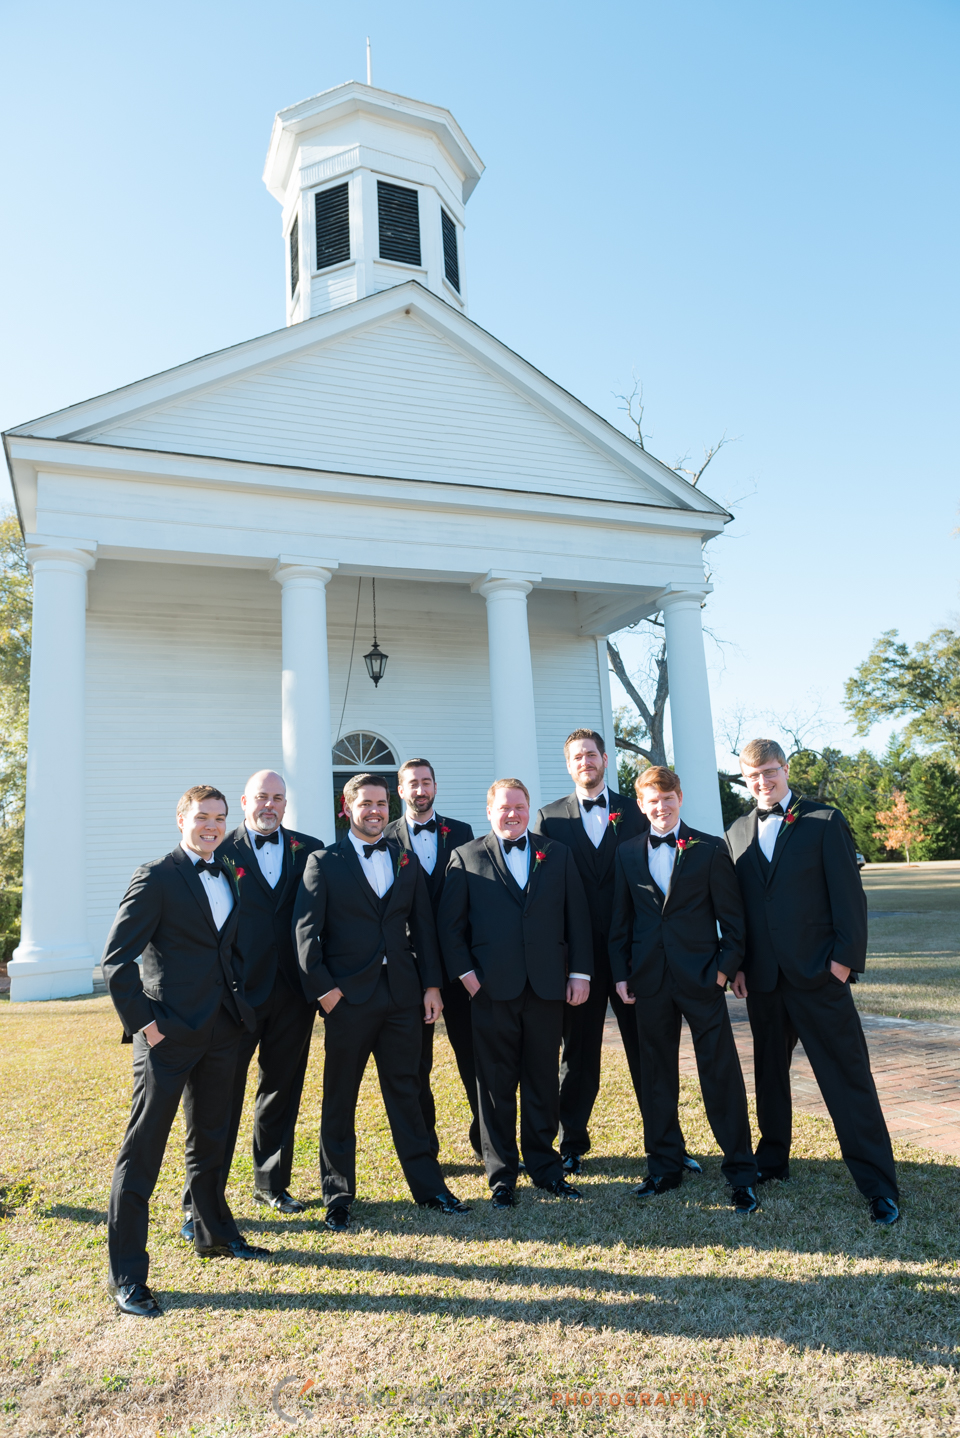 The groom and his groomsmen pose in front of the First Presbyterian Church in Marion, South Carolina